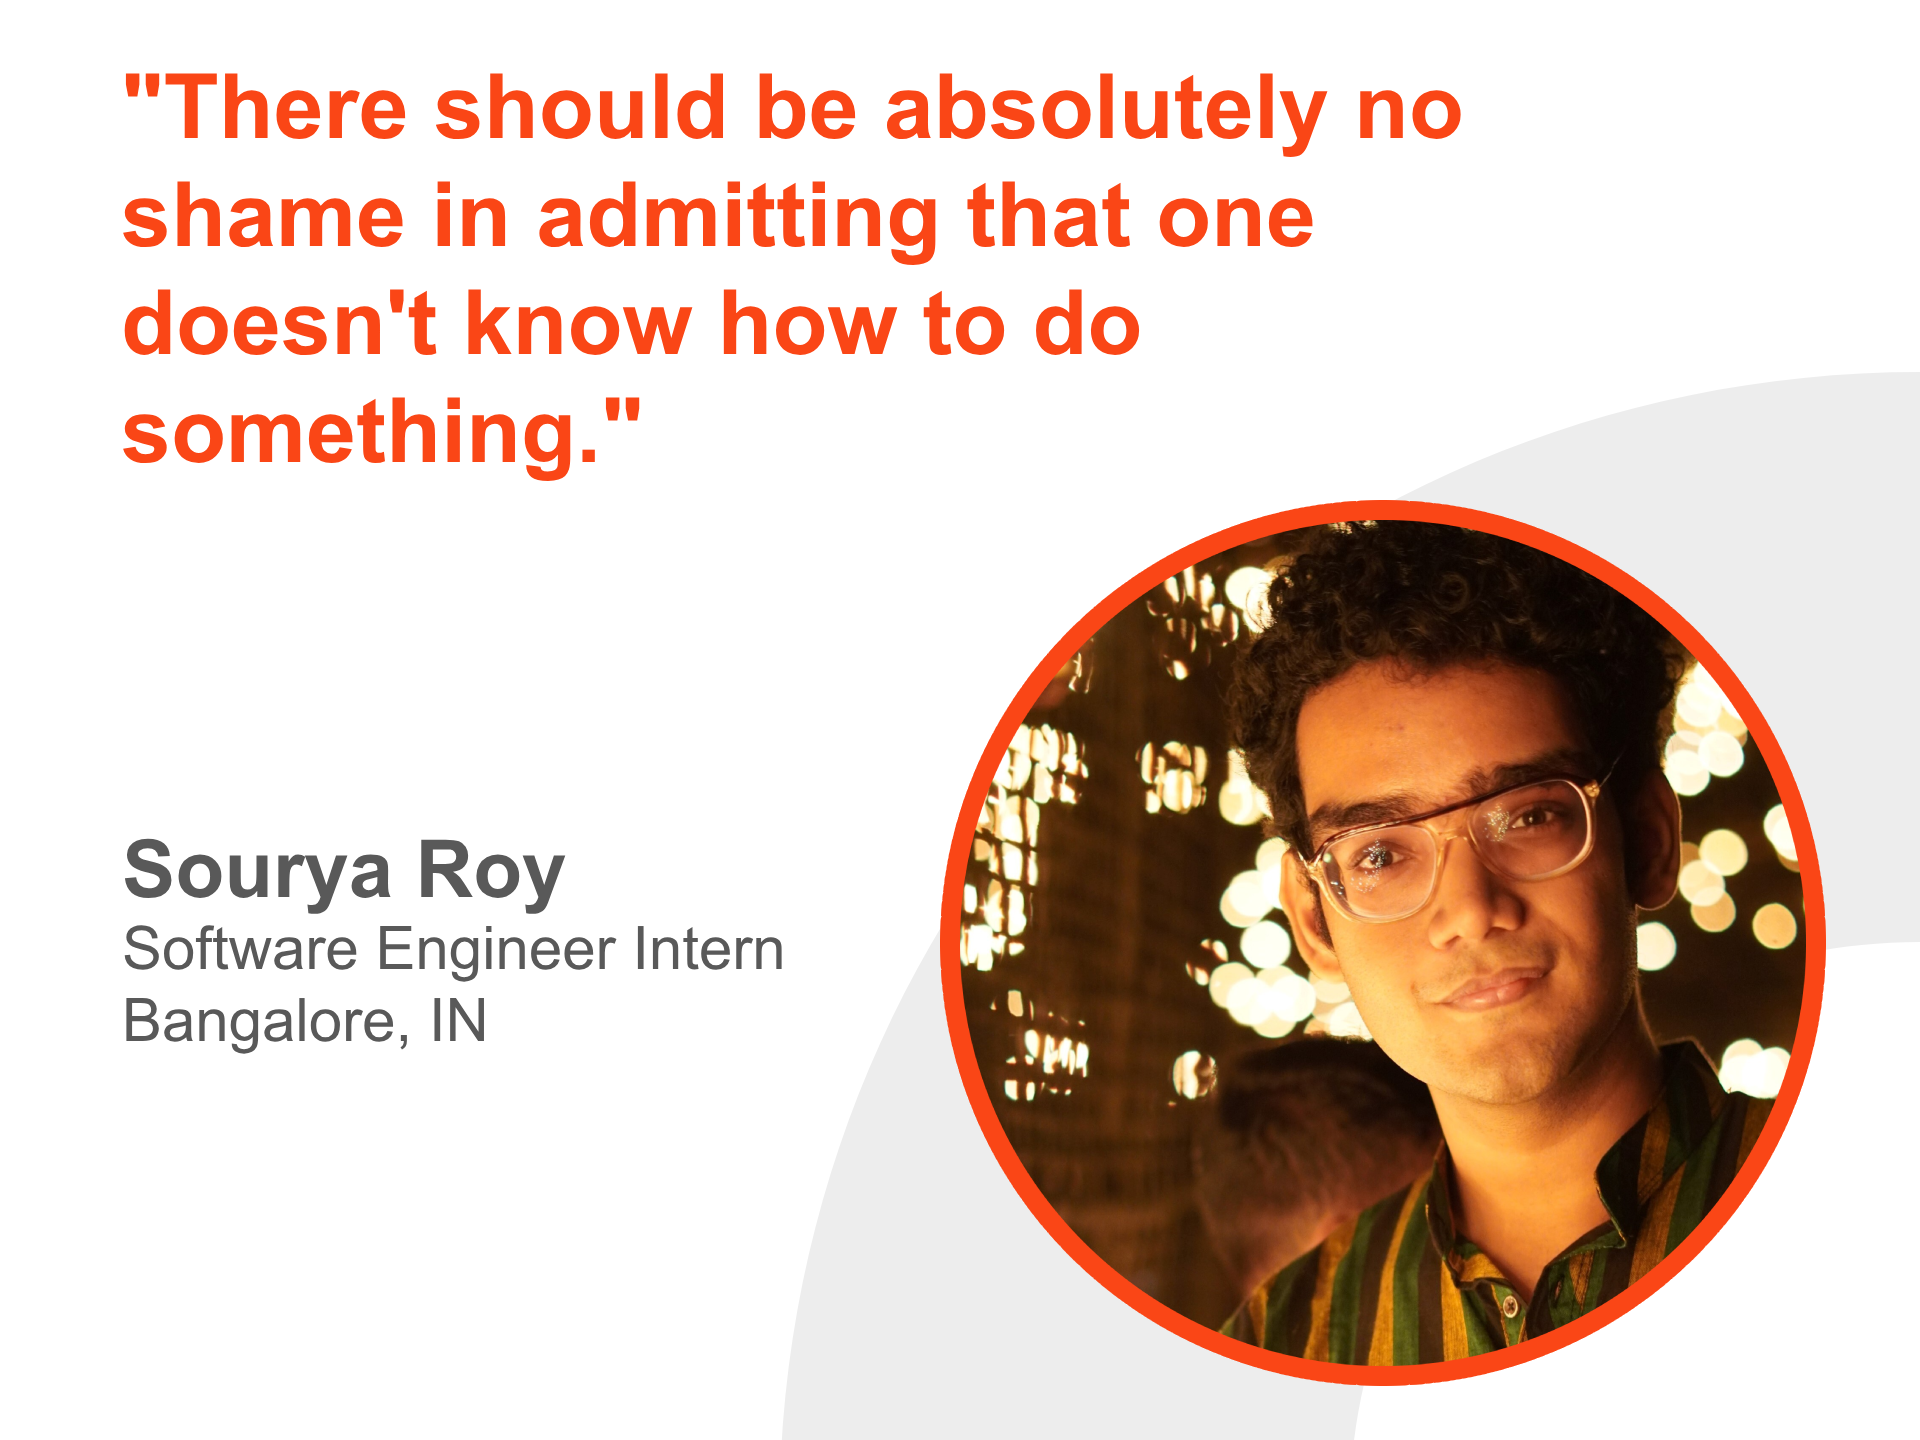 A picture containing Sourya Roy's headshot and one of his quotes